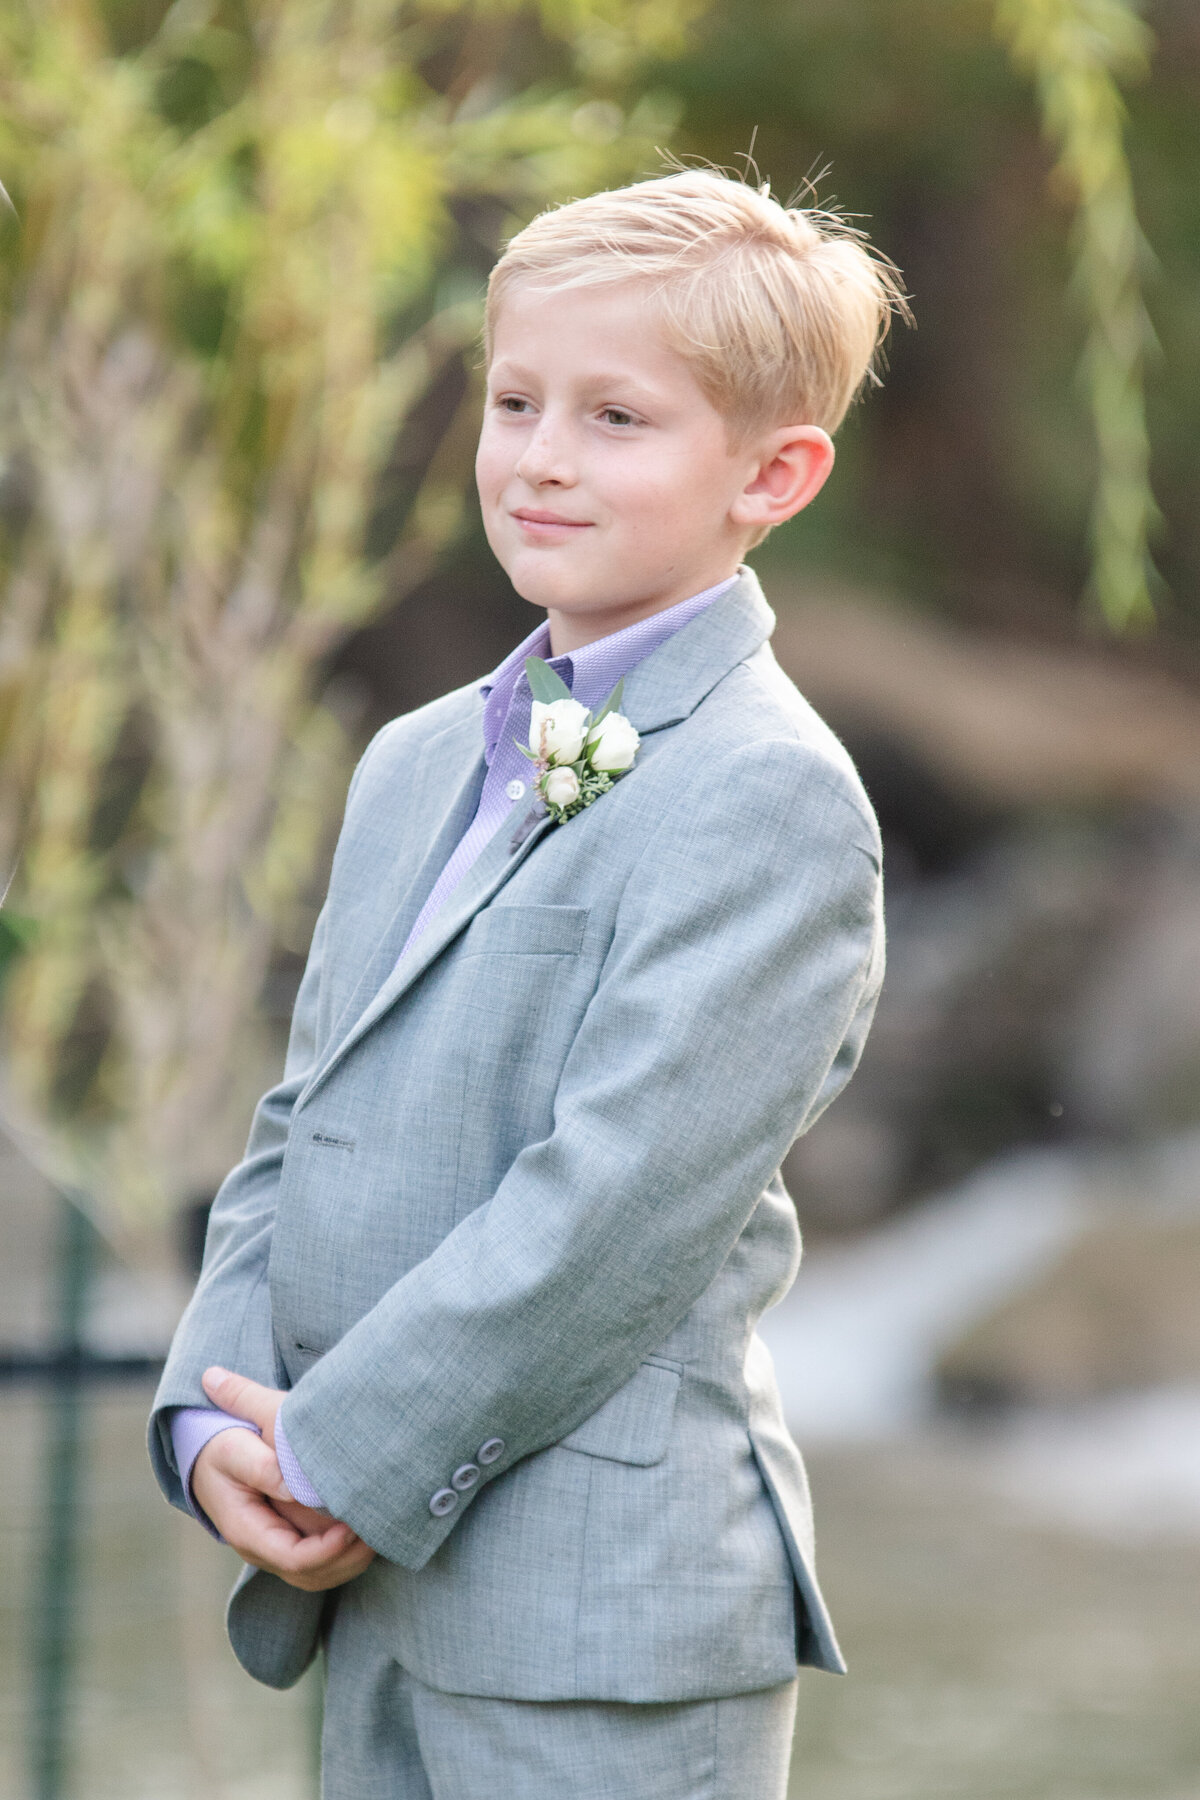 ring bearer also the bride's son in a gray jacket by Austin wedding photographer Firefly Photography